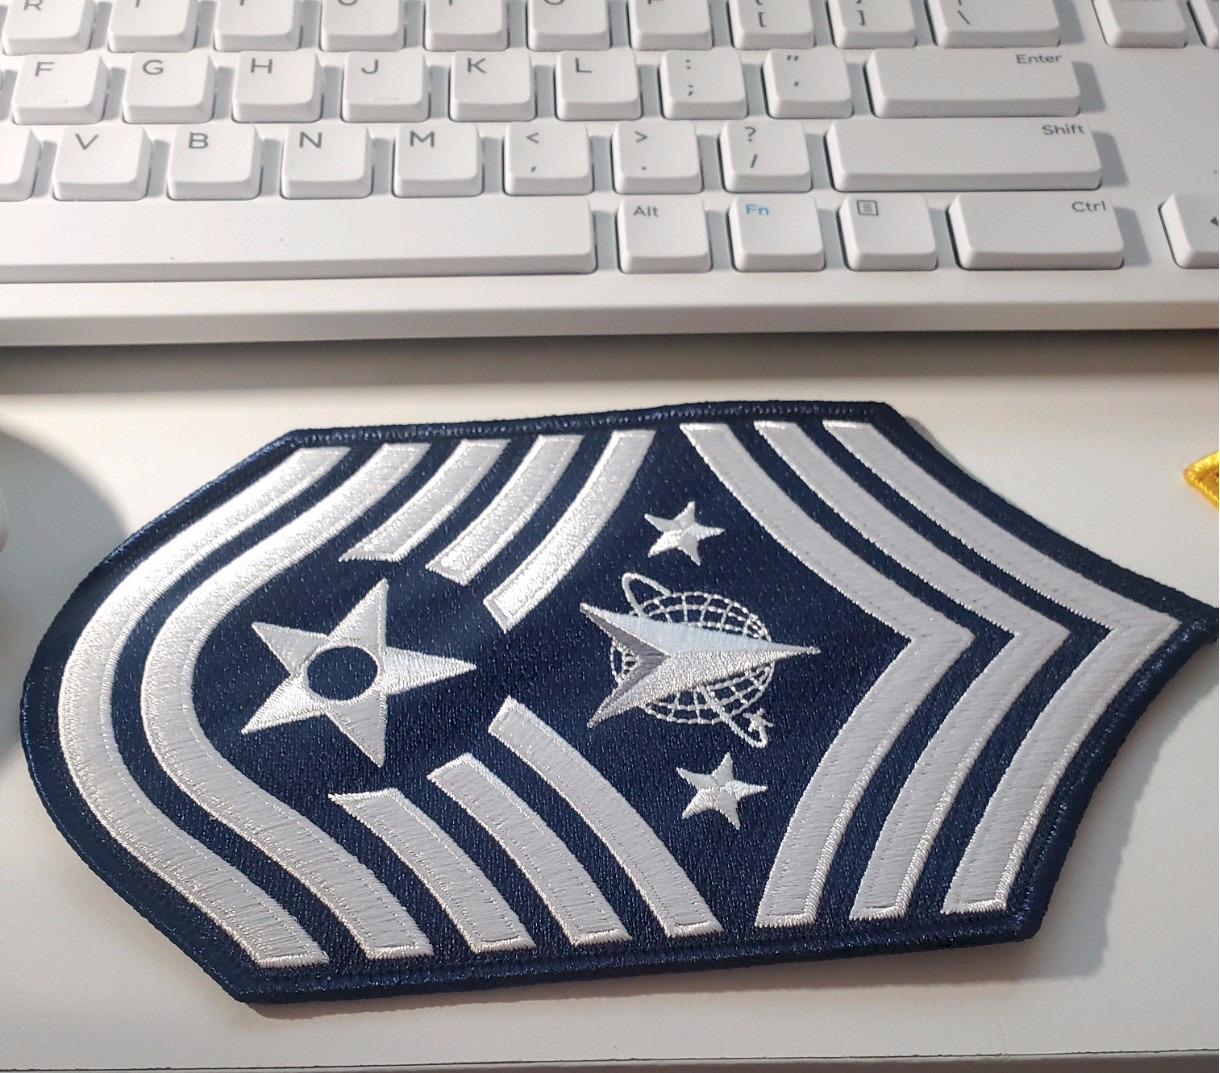 TOP Enlisted RANK (STRIPES) IN THE US SPACE FORCE ONLY HAVE 1 THESE not a PAIR